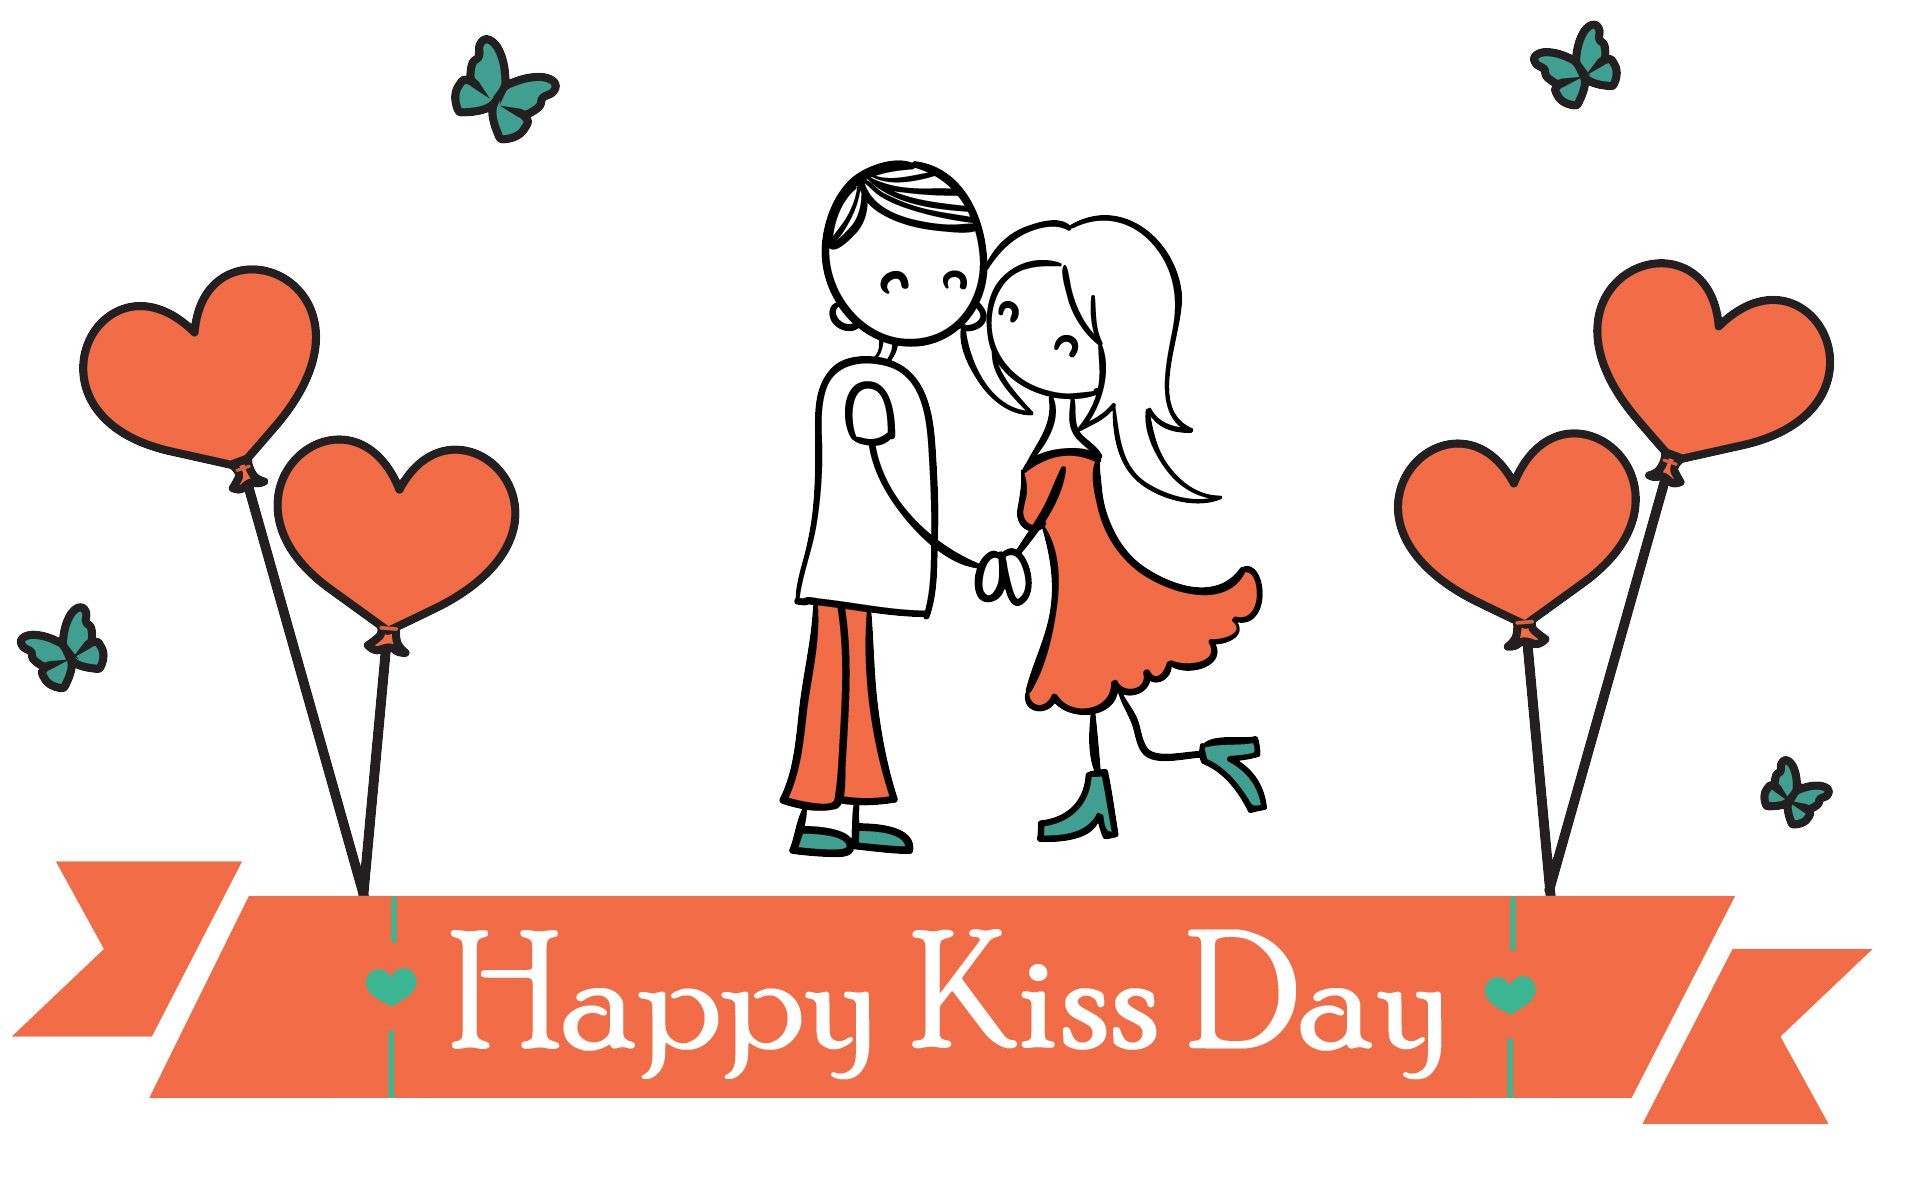 Download Kiss Wallpaper, Kiss Day E Greetings, Friendship Ecards, Happy Kiss Day